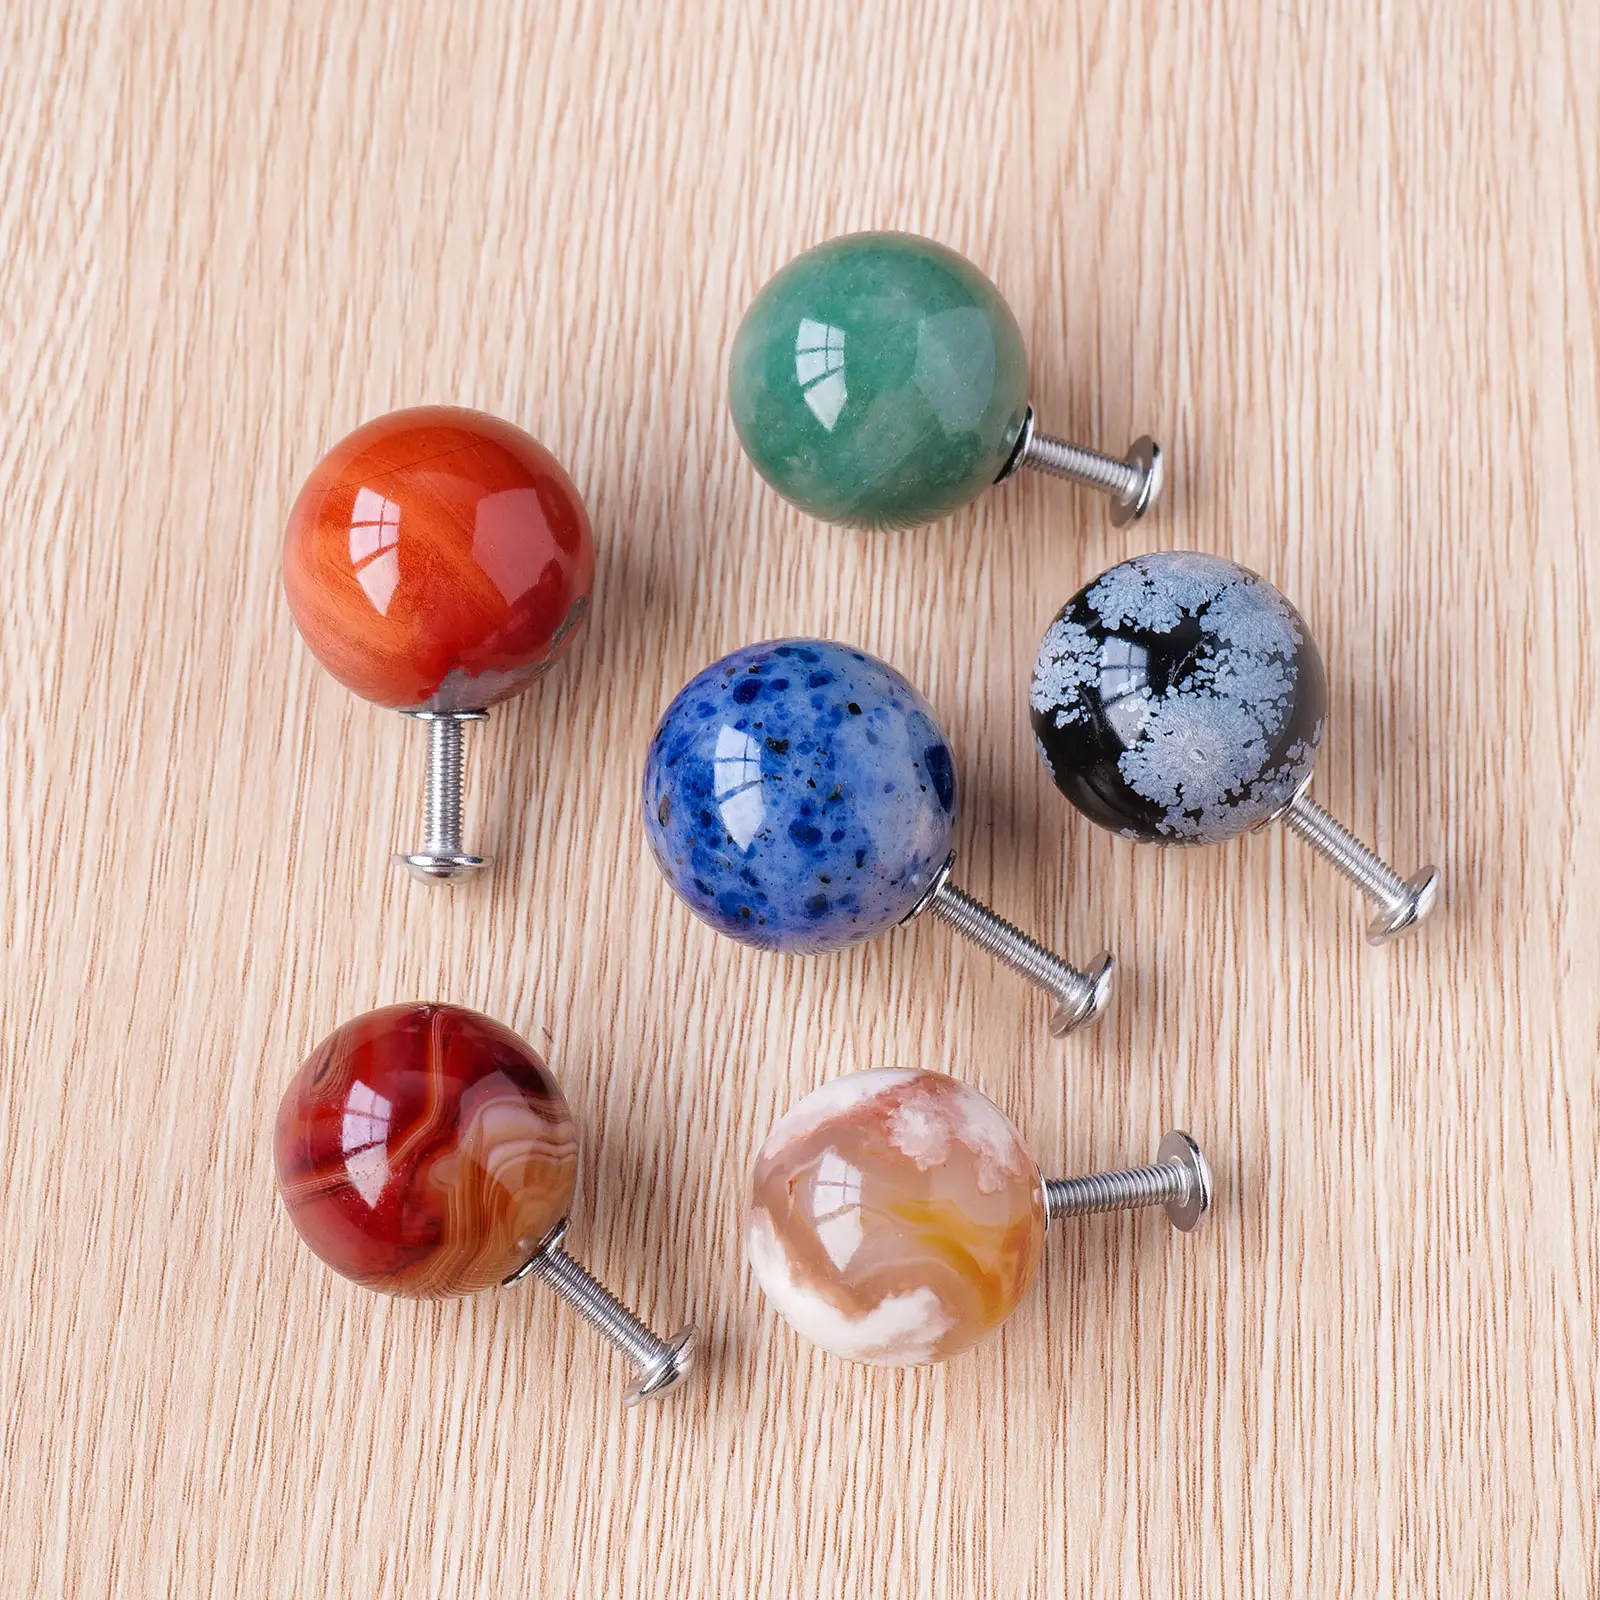 Wholesale Healing Natural Crystal Handmade Cherry Agate Little Ball Ornament Carved Crystal Drawer Pull For Decor